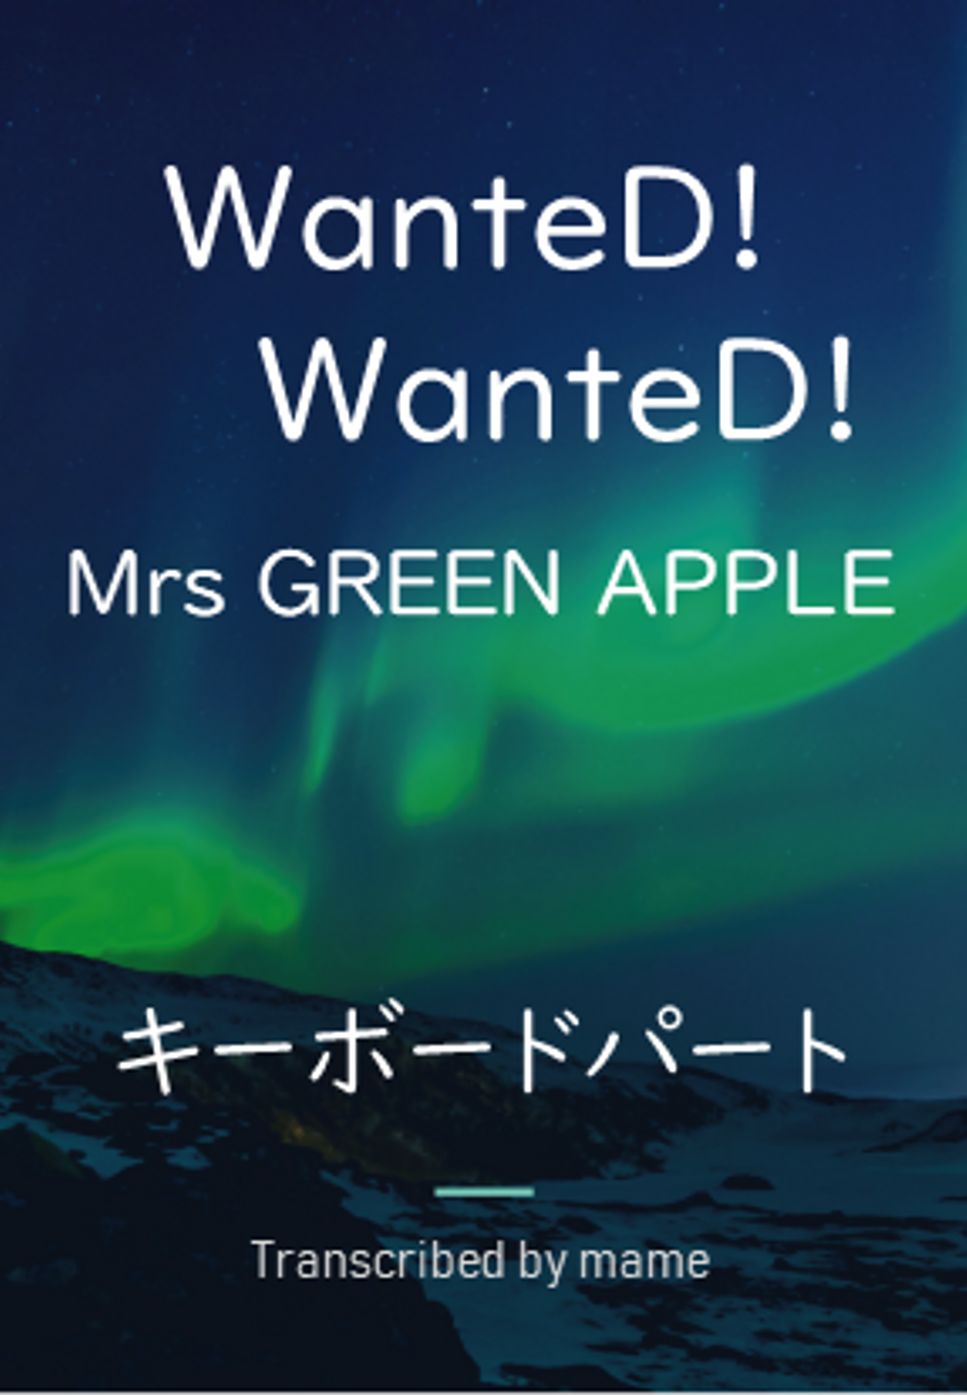 Mrs GREEN APPLE - WanteD! WanteD! (keyboard part) by mame